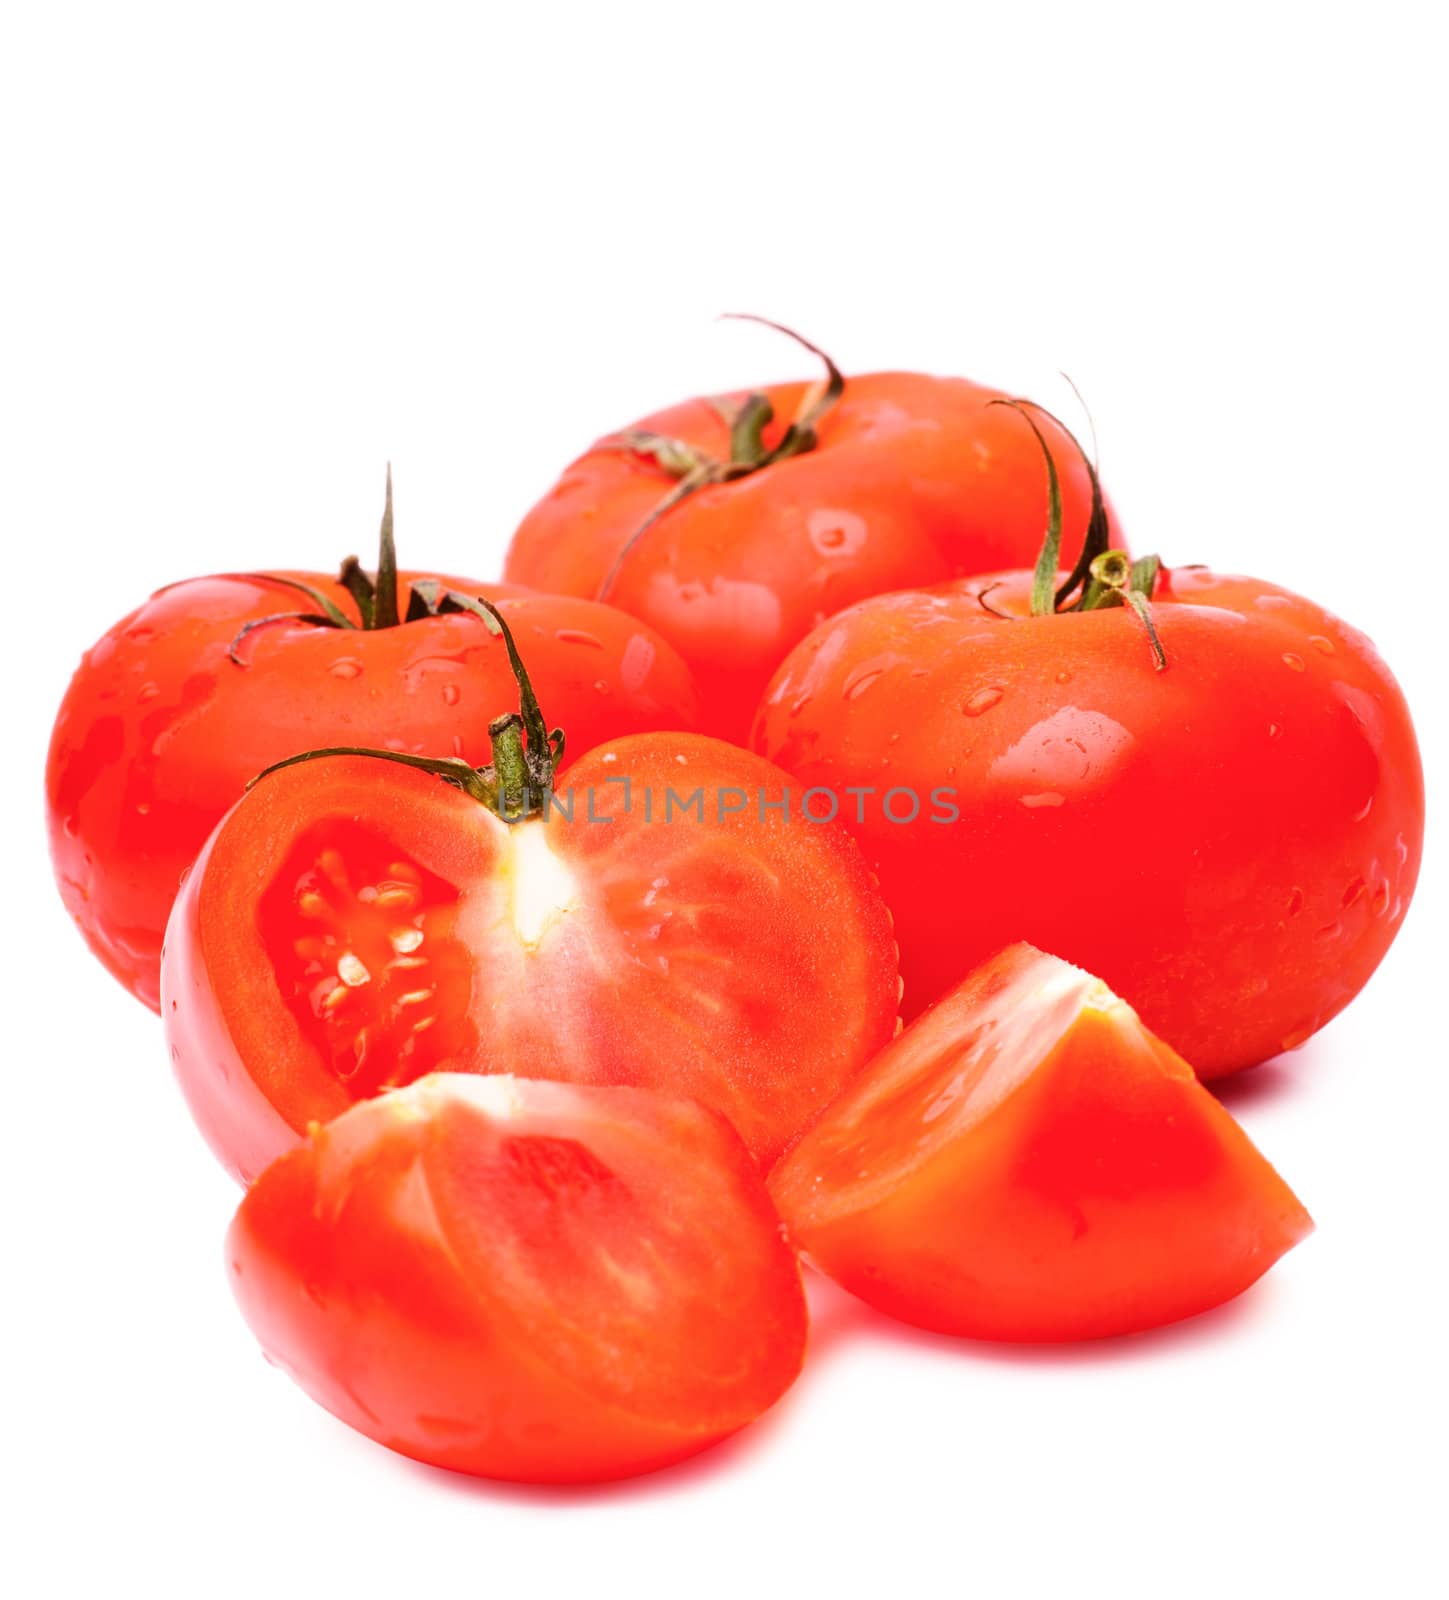 Closeup view of tomatoes isolated on the white background